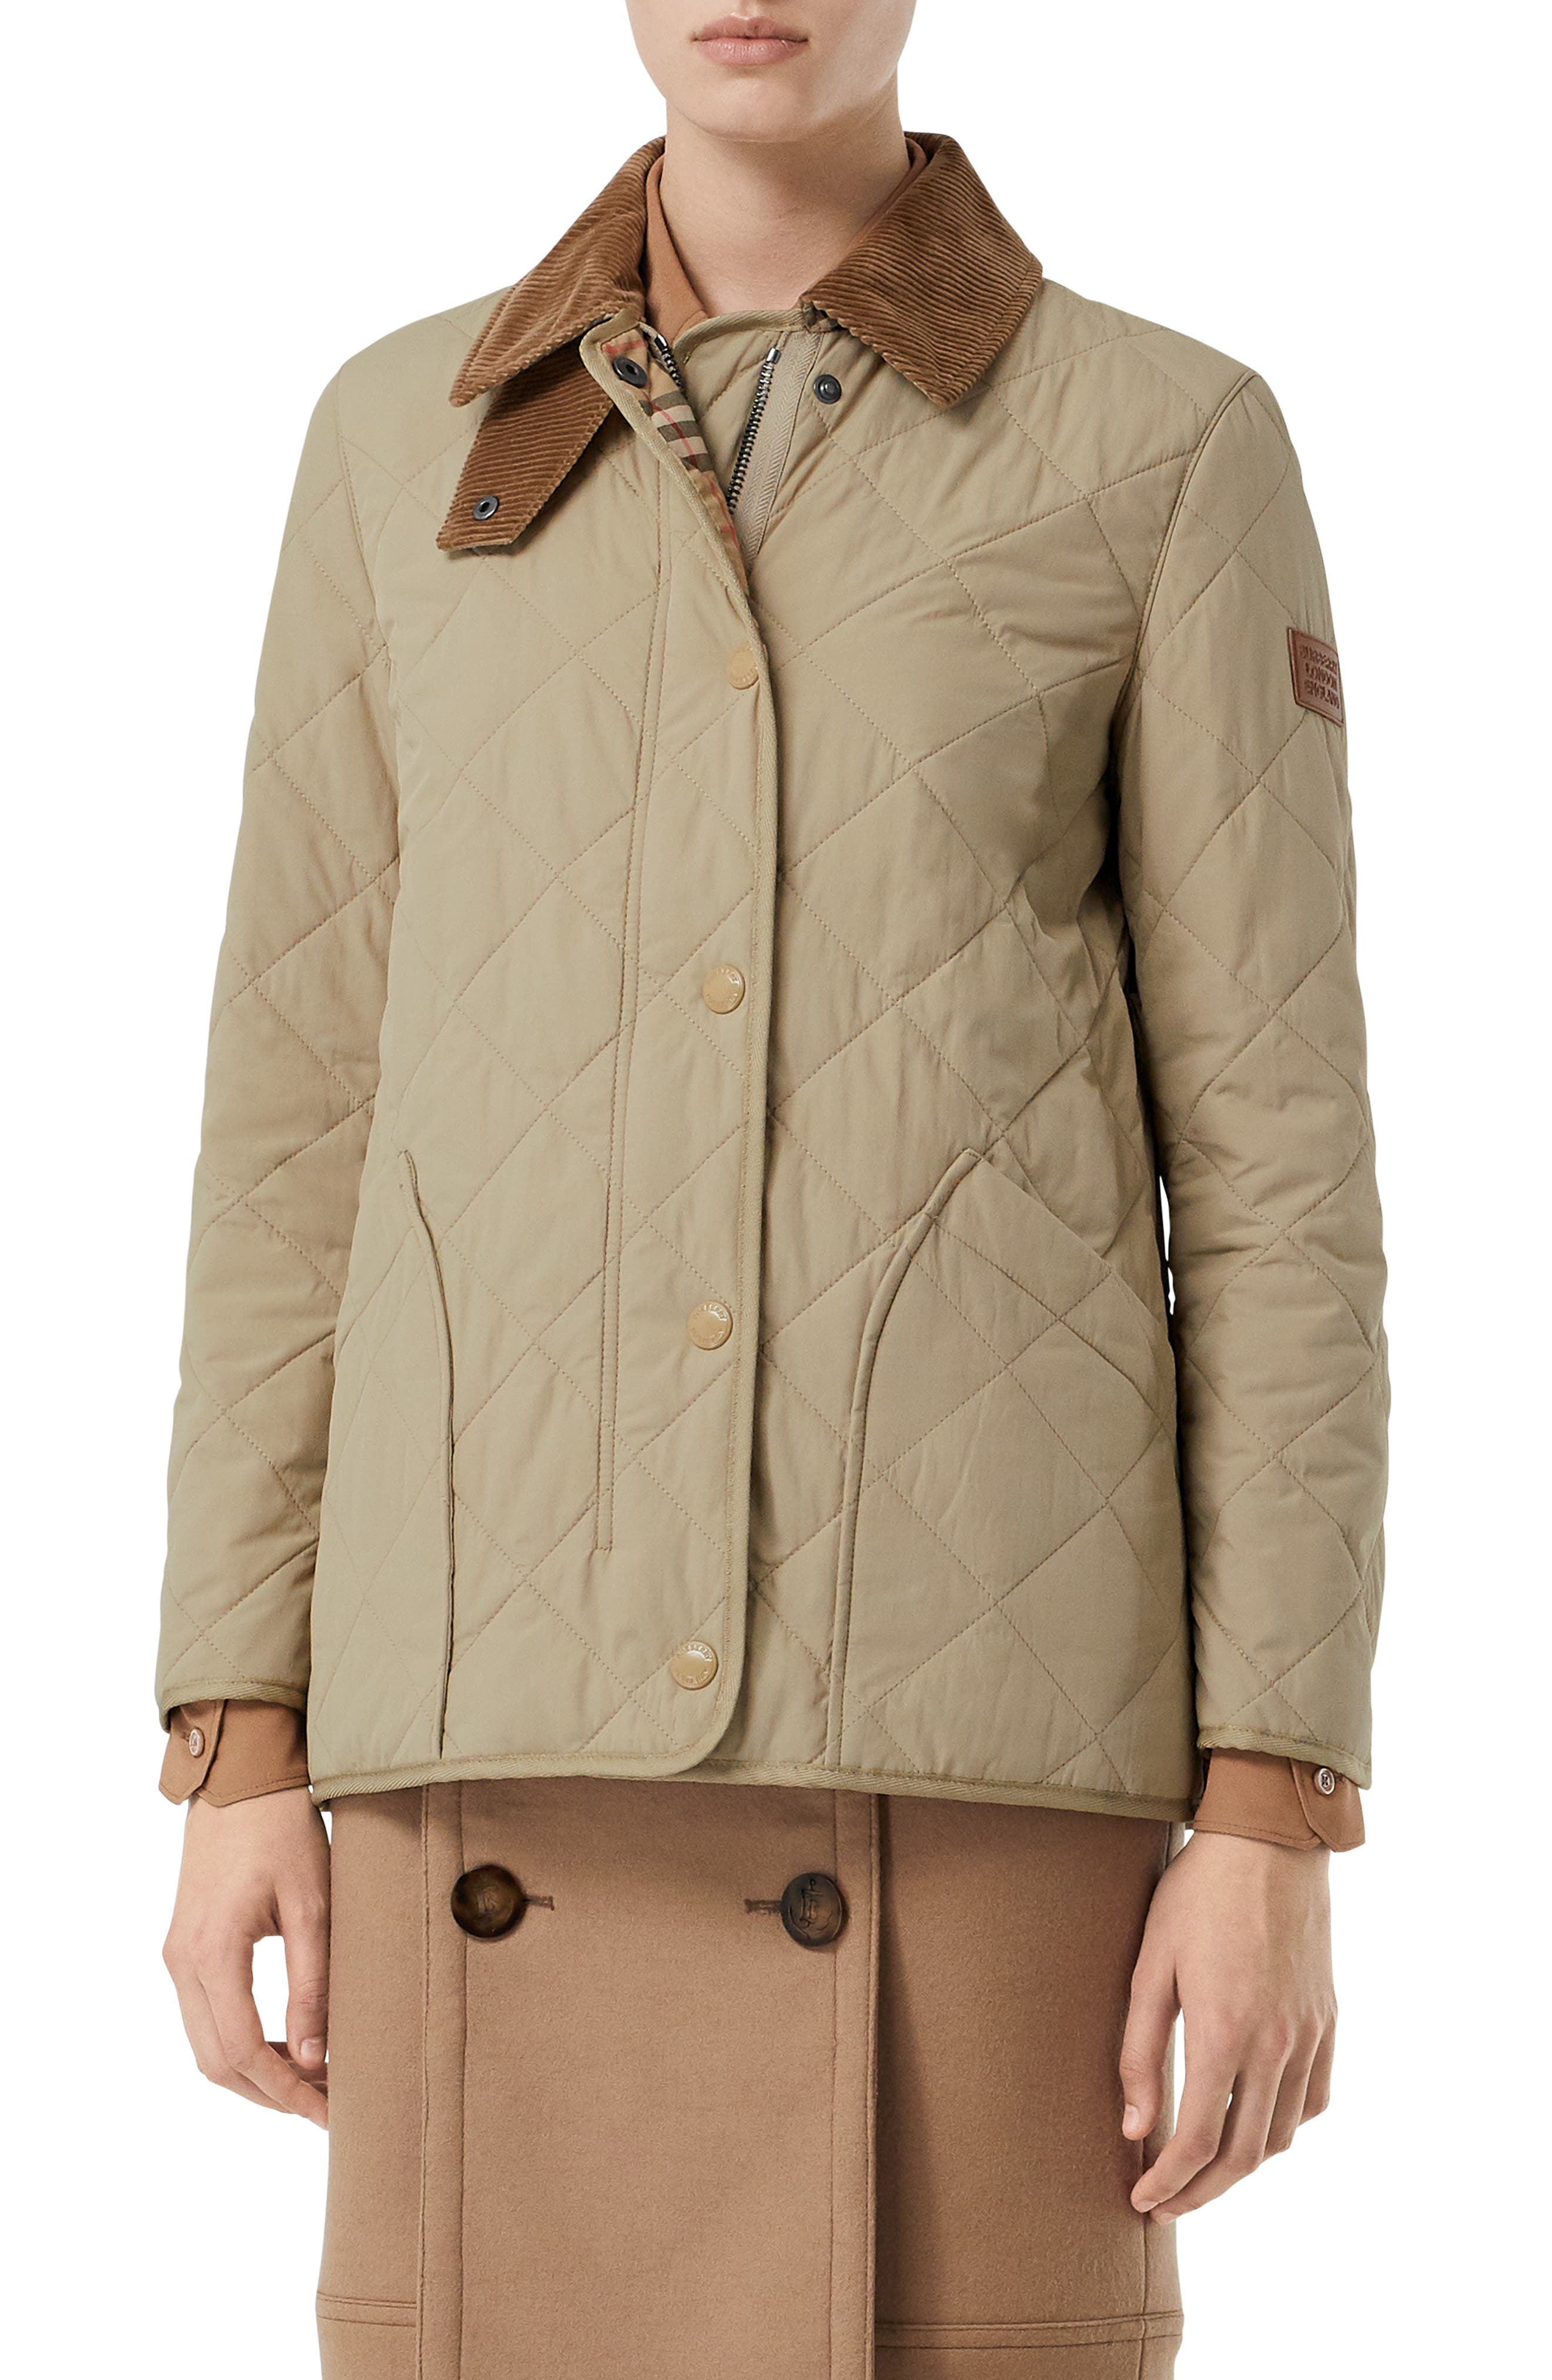 Burberry Cotswold Thermoregulated Quilted Barn Jacket in Honey at Nordstrom